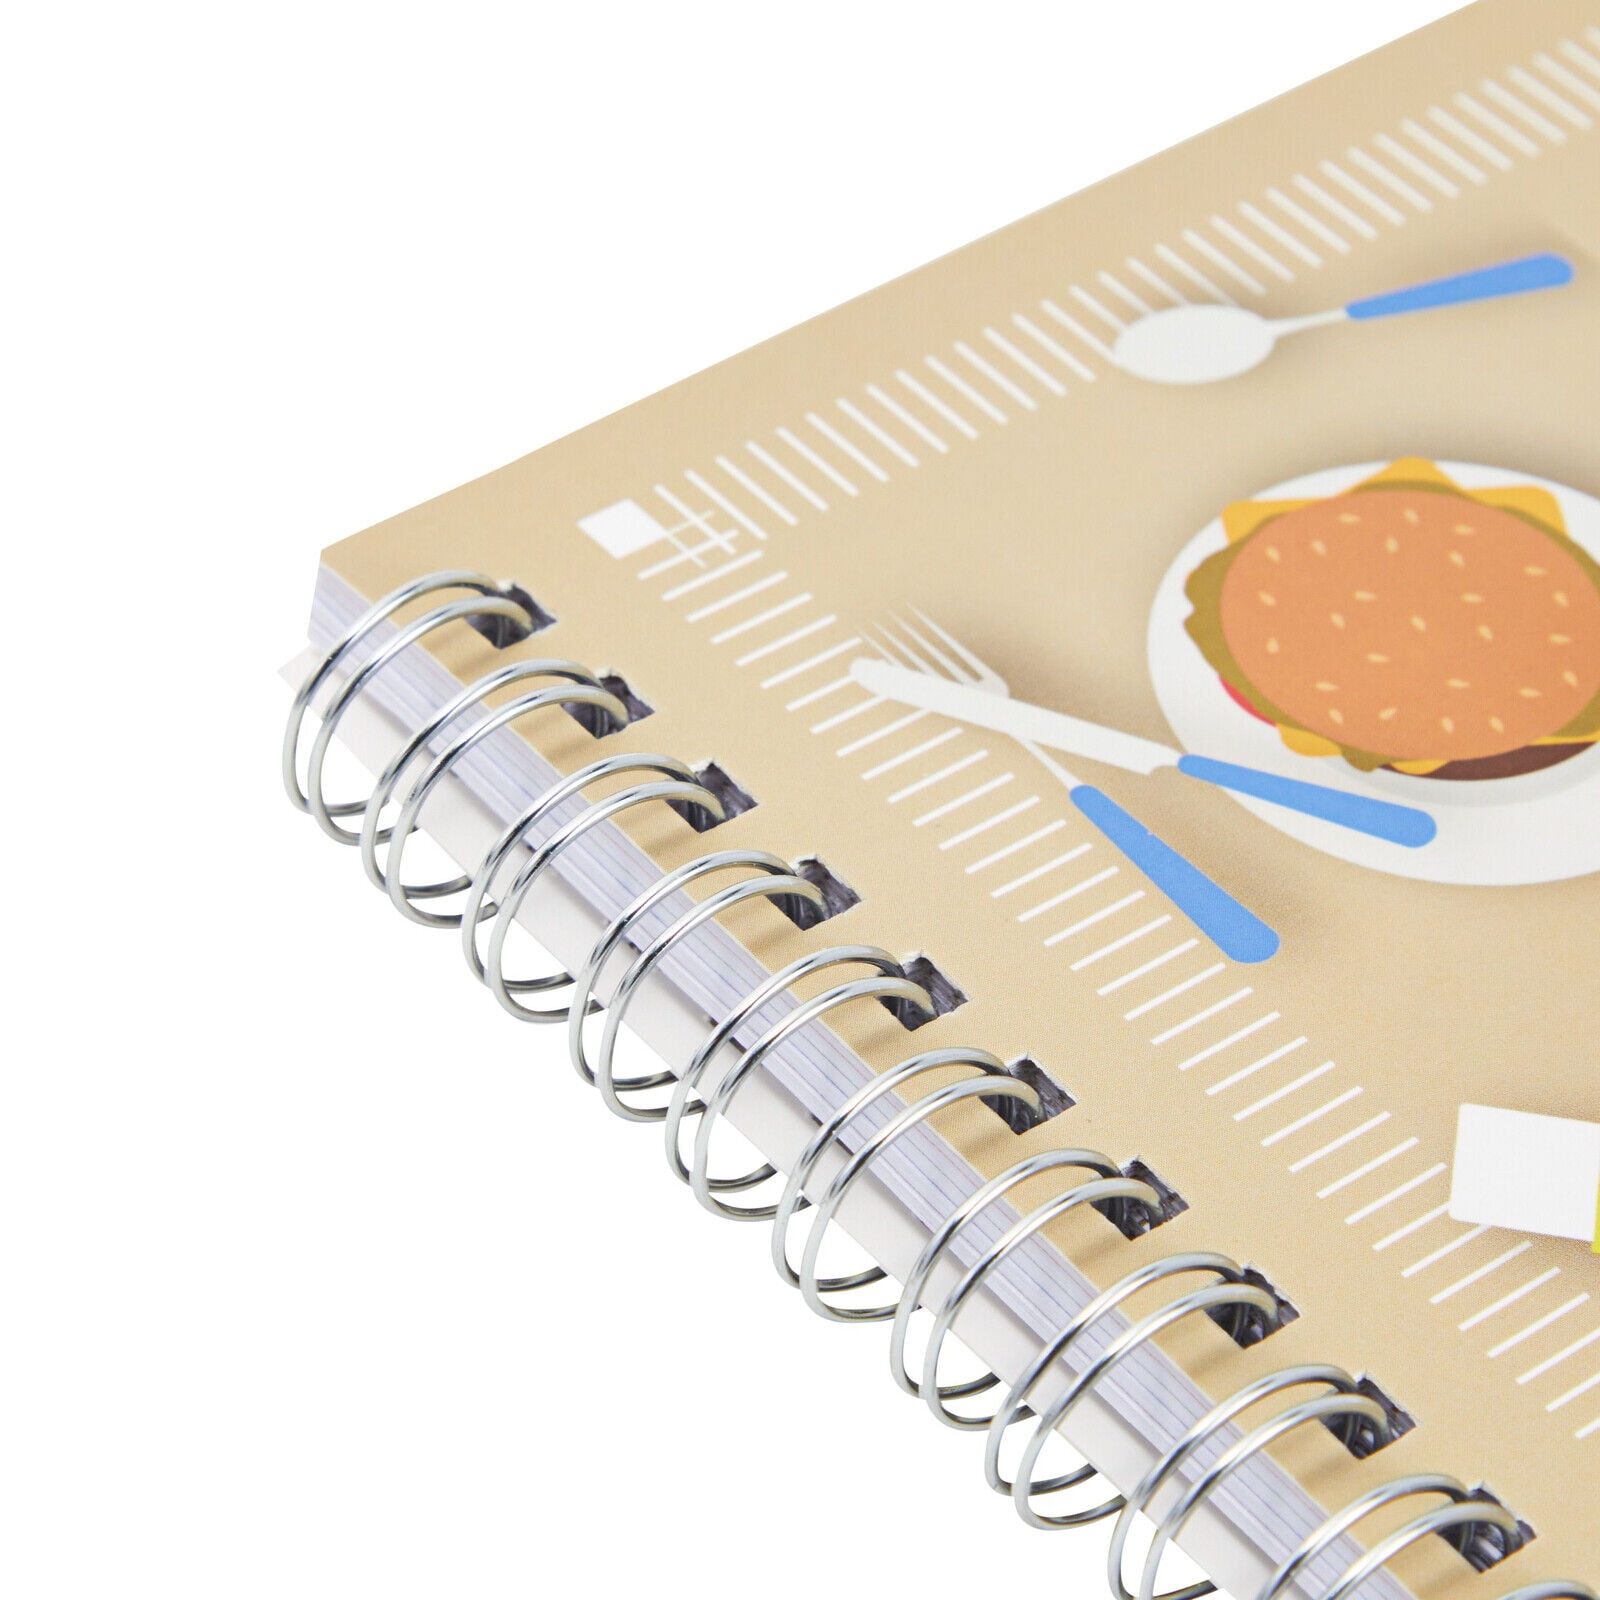 Family Recipe Book To Write In, Spiral Bound DIY Make Your Own